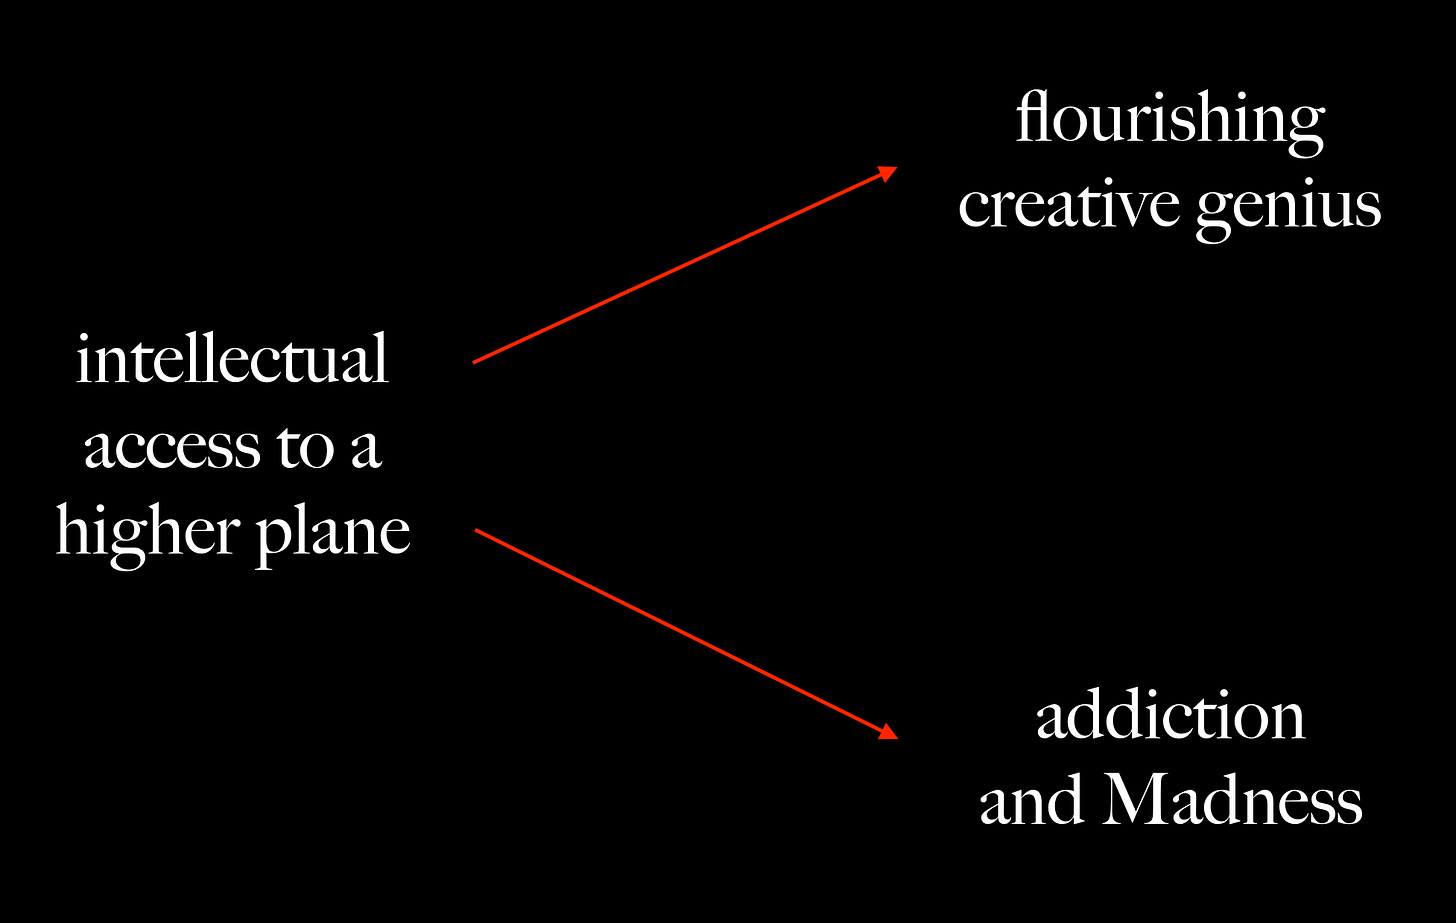 "Intellectual access to a higher plane" is a bubble on the left. Two arrows branching out from it go to bubbles captioned "creative genius" and "addiction and Madness," respectively.